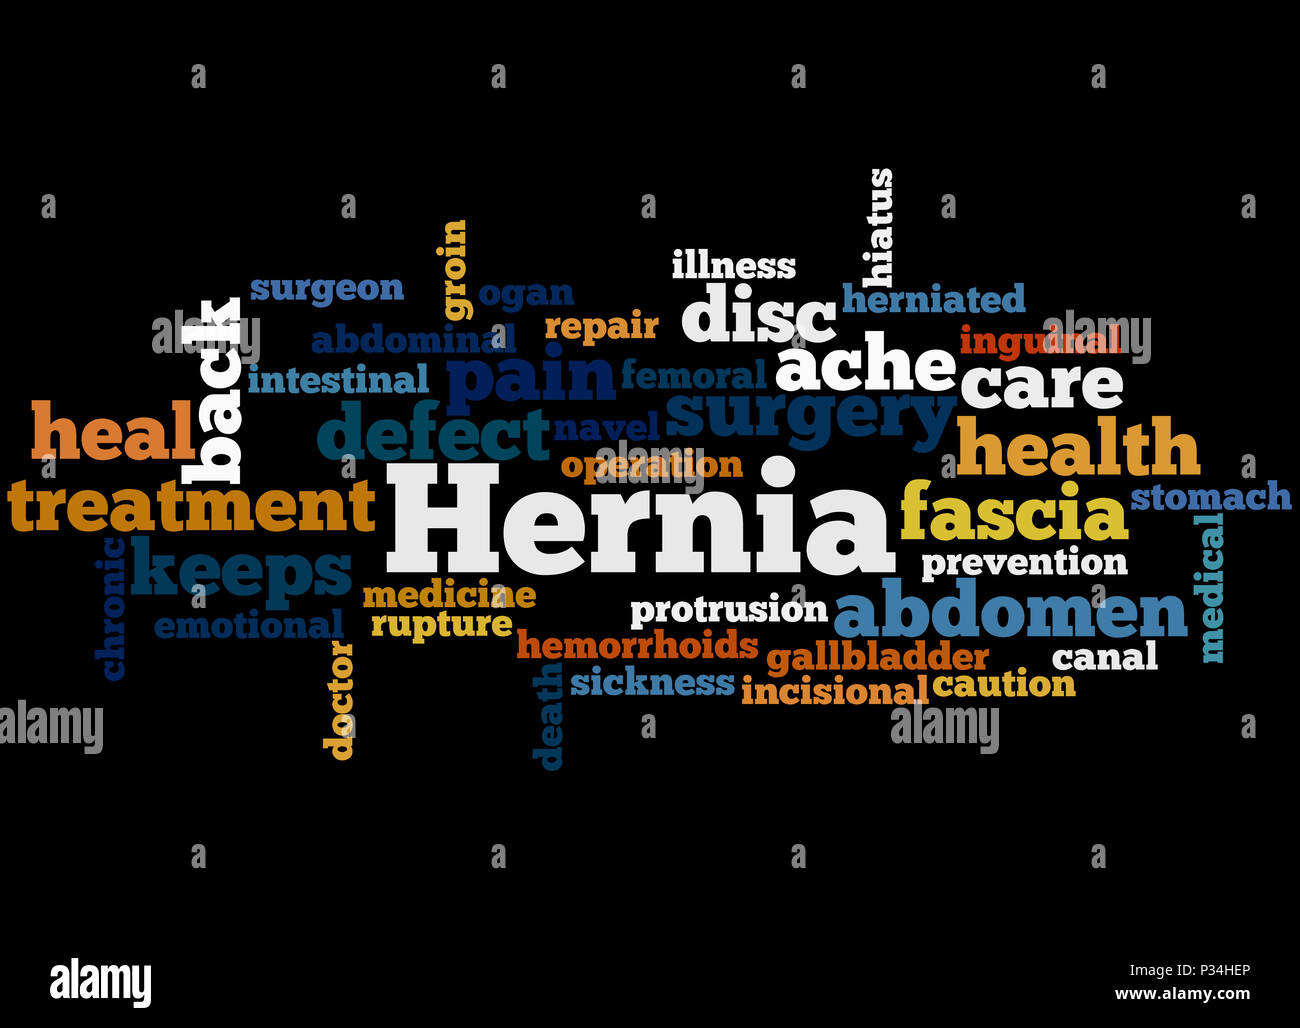 Hernia, word cloud concept on black background. Stock Photo